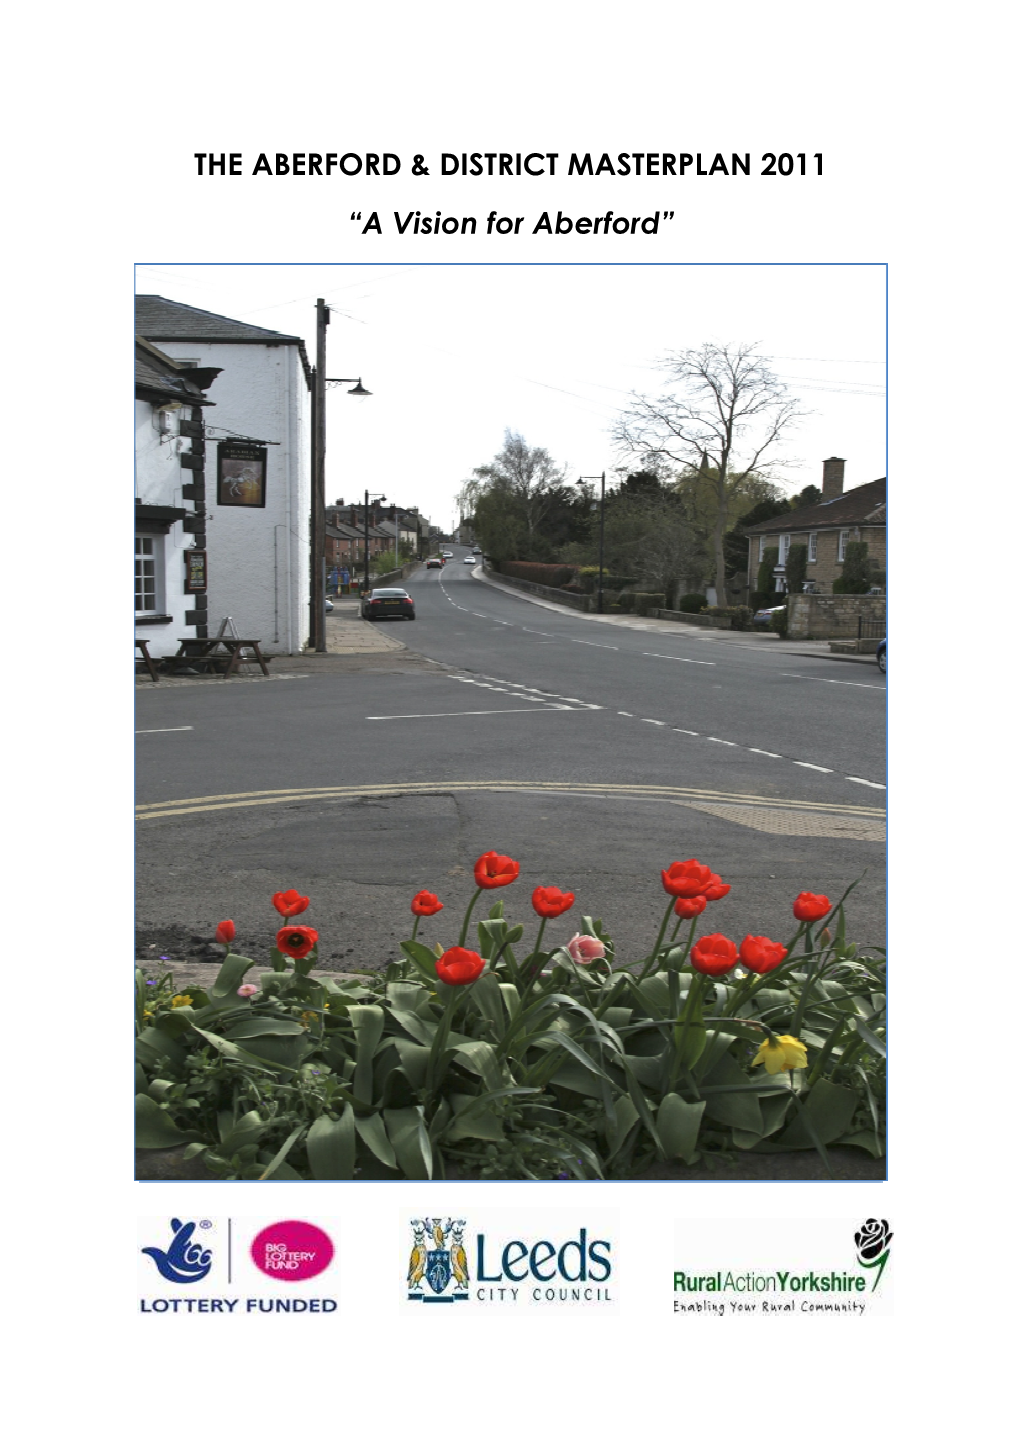 THE ABERFORD & DISTRICT MASTERPLAN 2011 “A Vision For